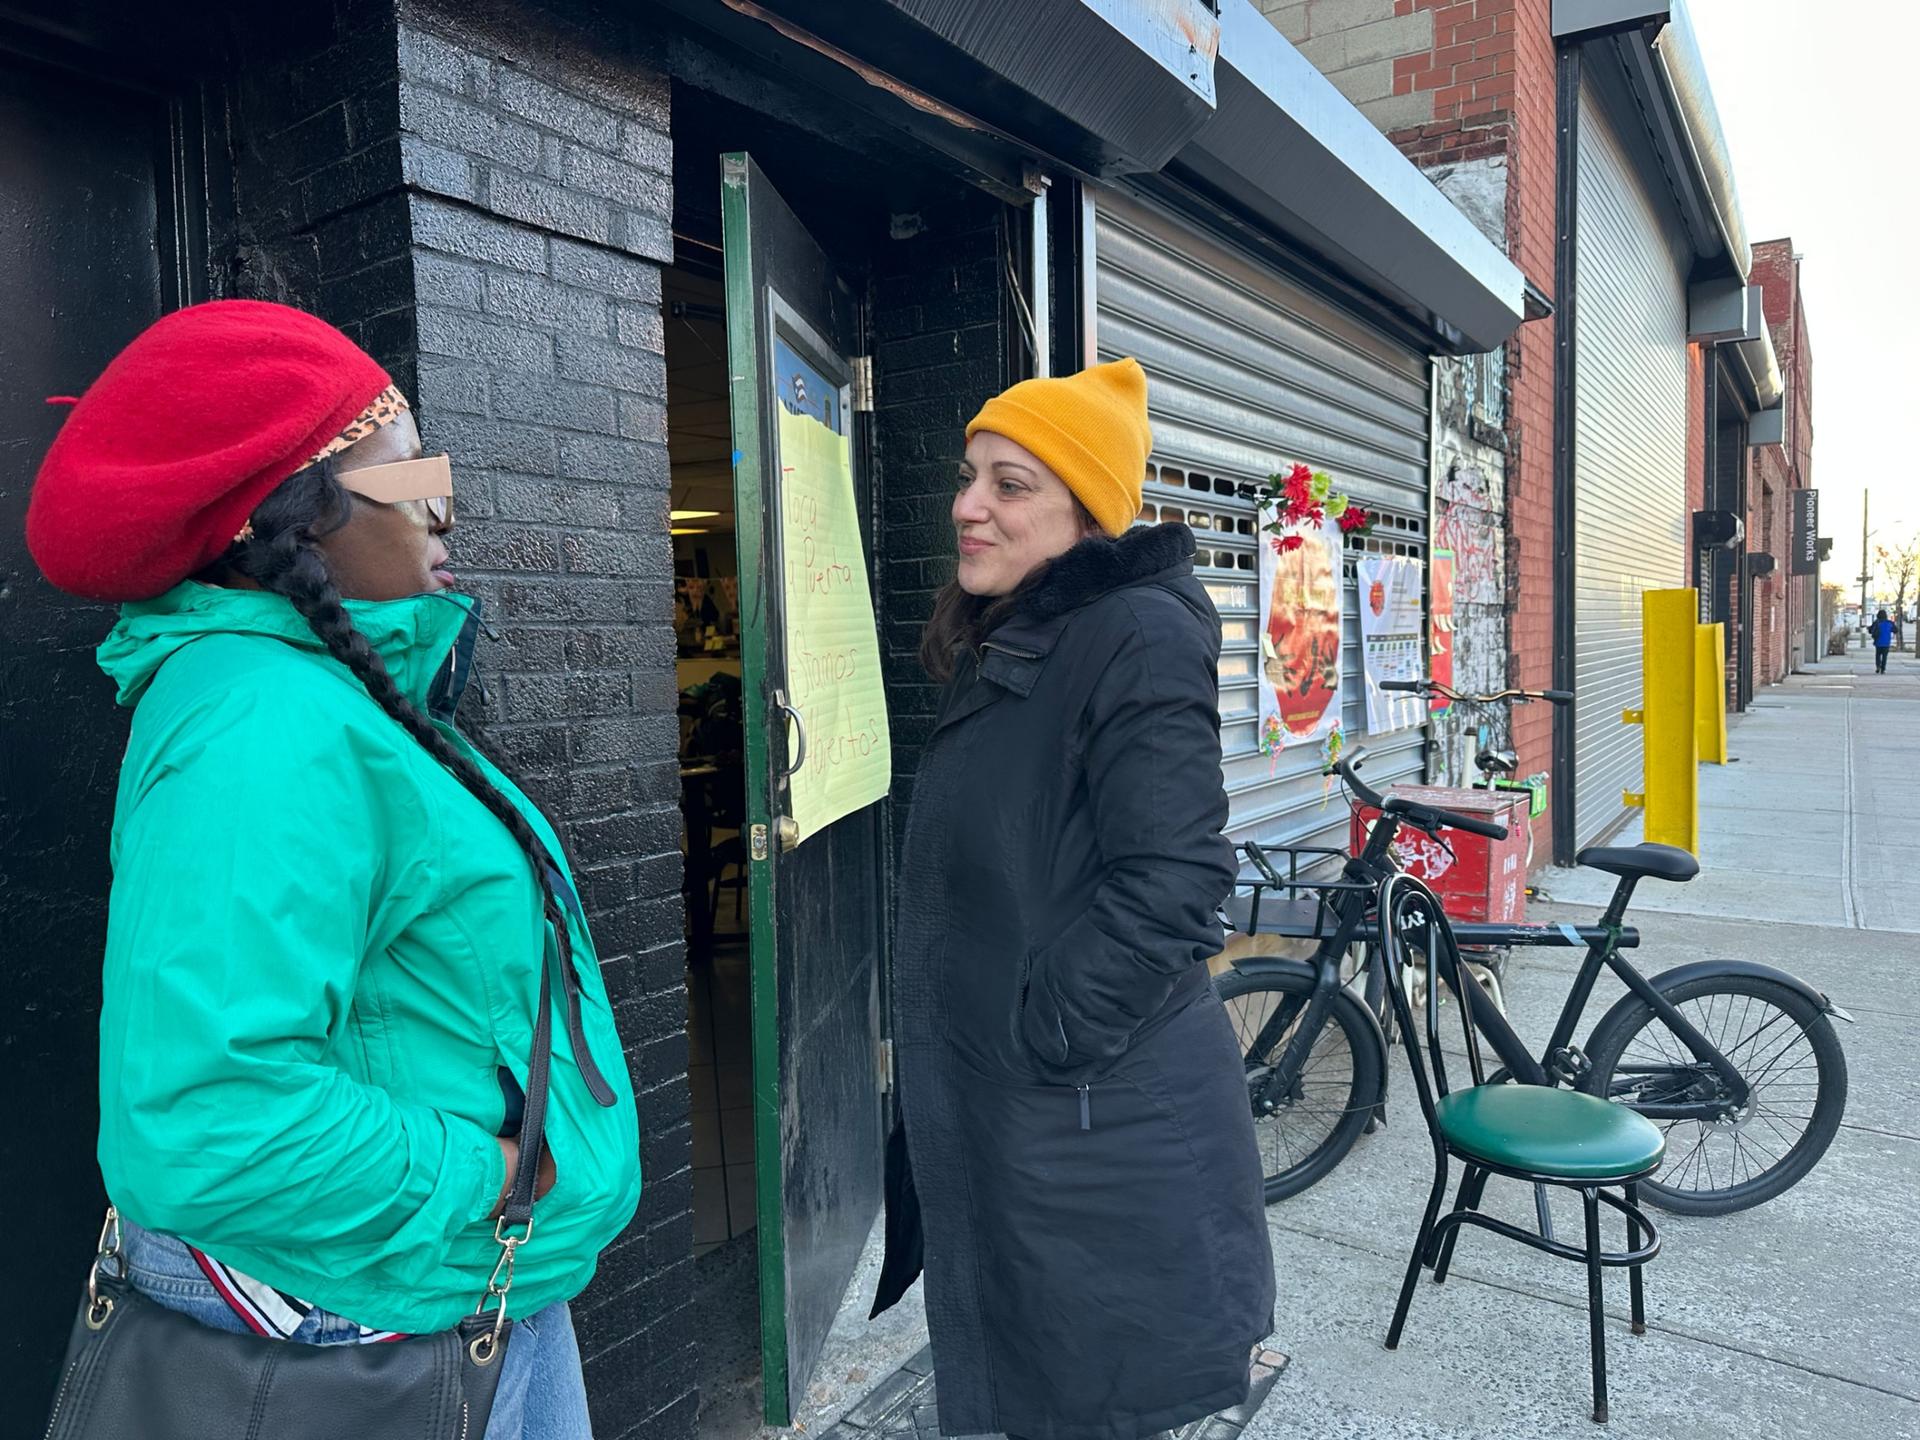 Louise Bauso (right) is an ESL teacher who runs Red Hook Mutual Aid, an organization of local volunteers who is providing assistance to the migrants who have been moved to the neighborhood.